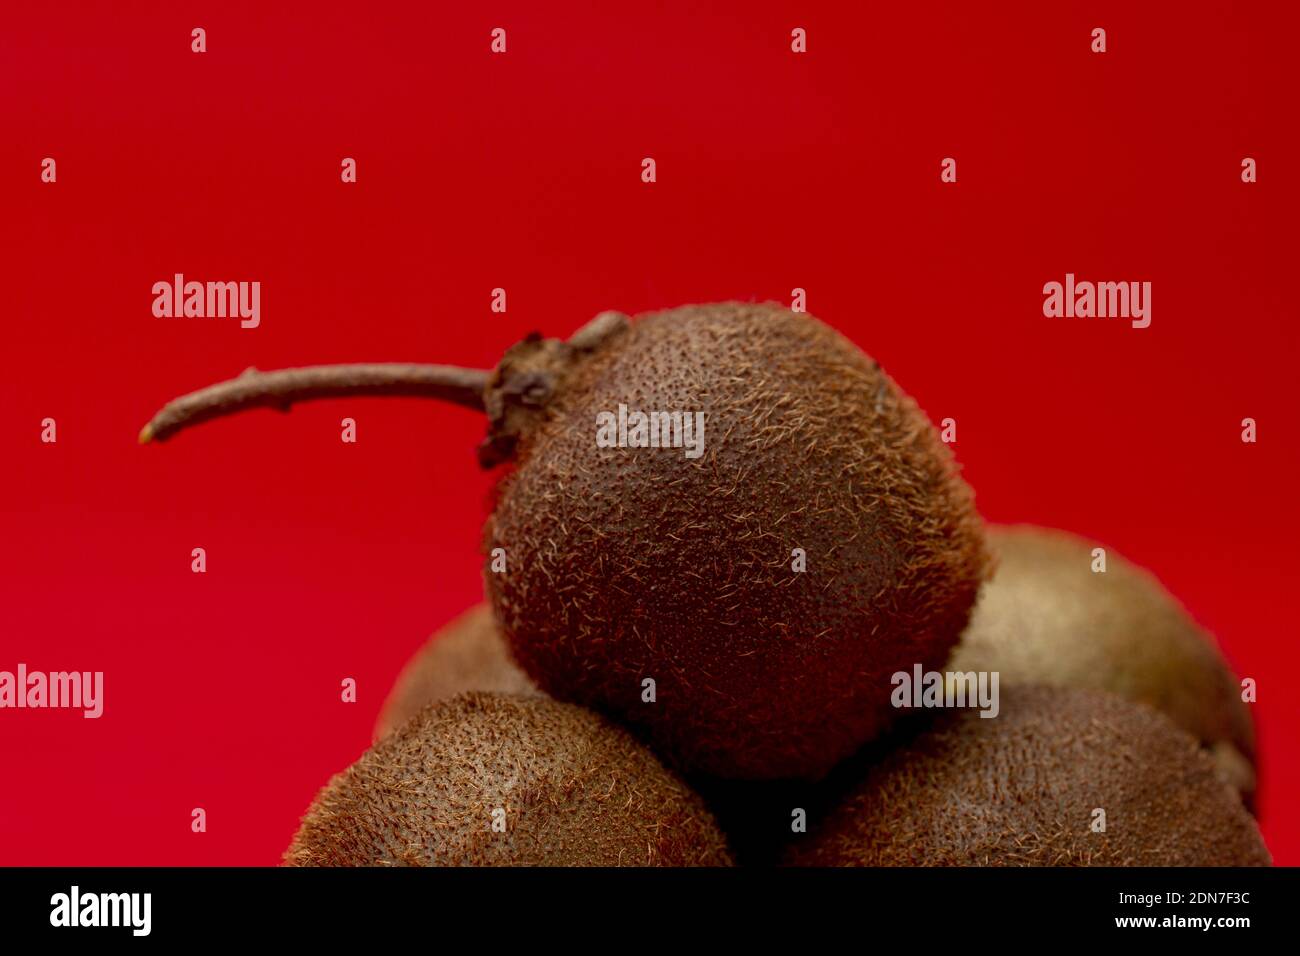 Closeup macro shot with a tiny kiwifruit of Actinidia Deliciosa Setosa species on top of others against an intense dark red background Stock Photo